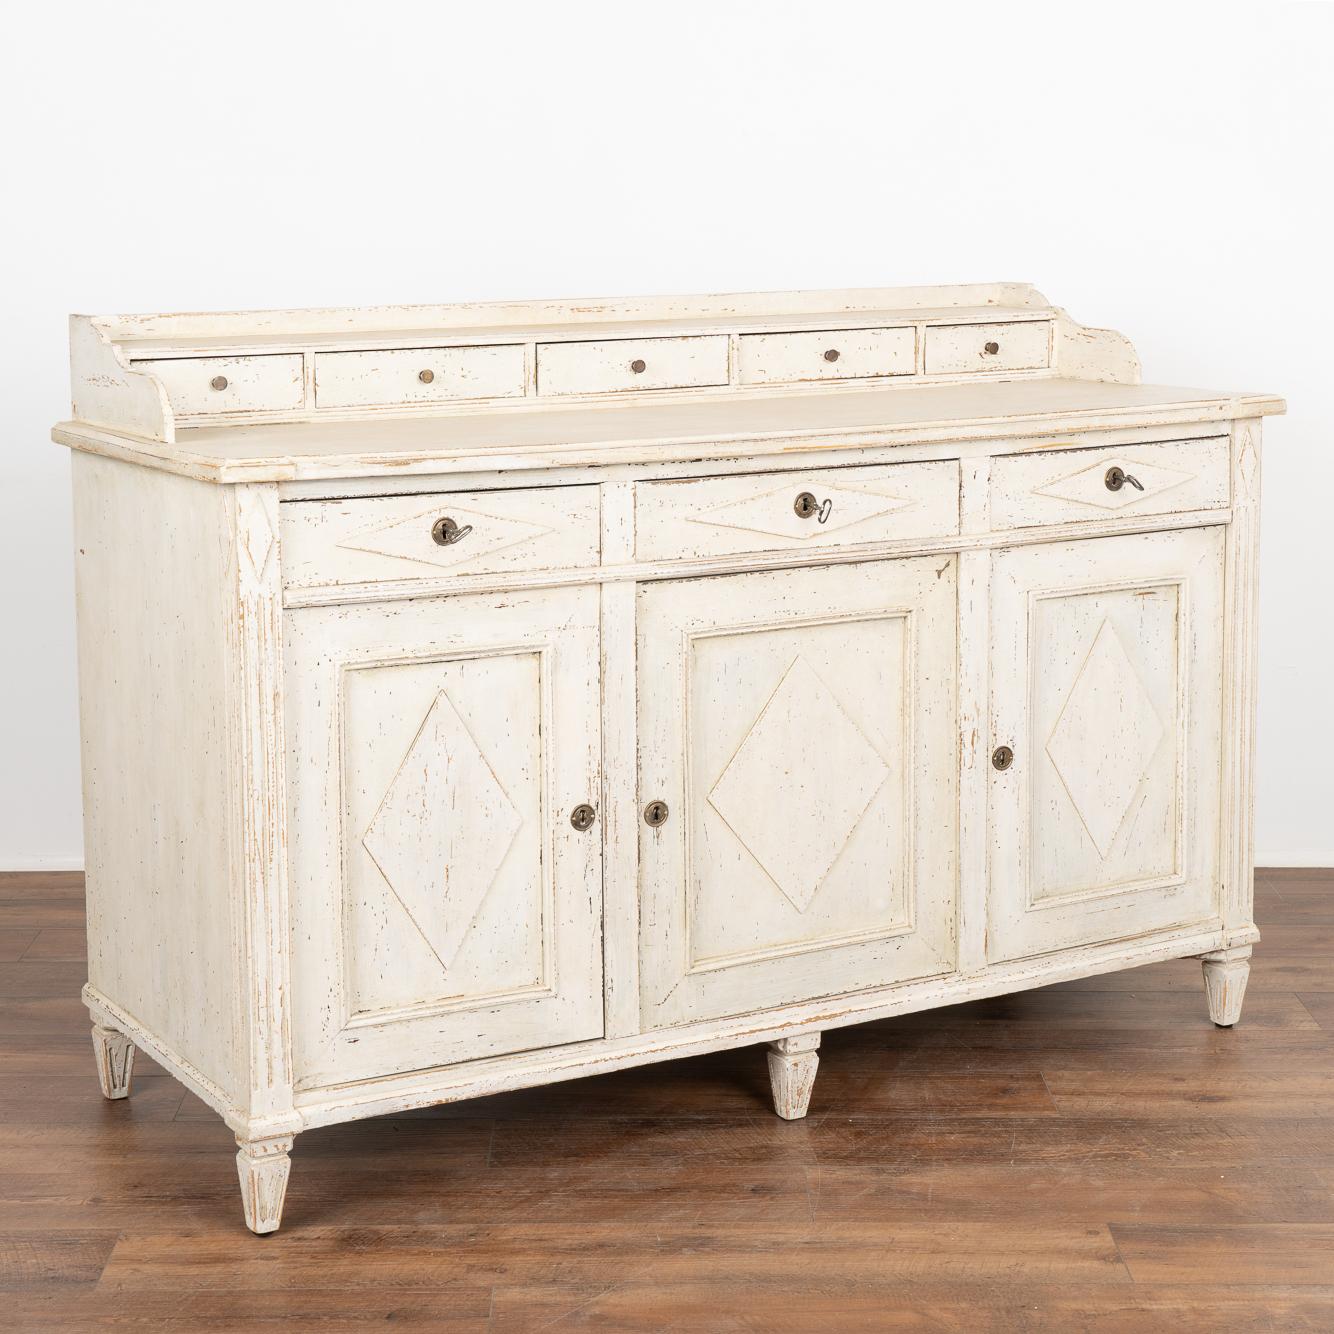 Gustavian white painted pine sideboard or buffet server with traditional decorative Swedish diamond panels along drawers and doors, raised on tapered fluted feet.
Unique to this cabinet is the additional five small drawers above the serving